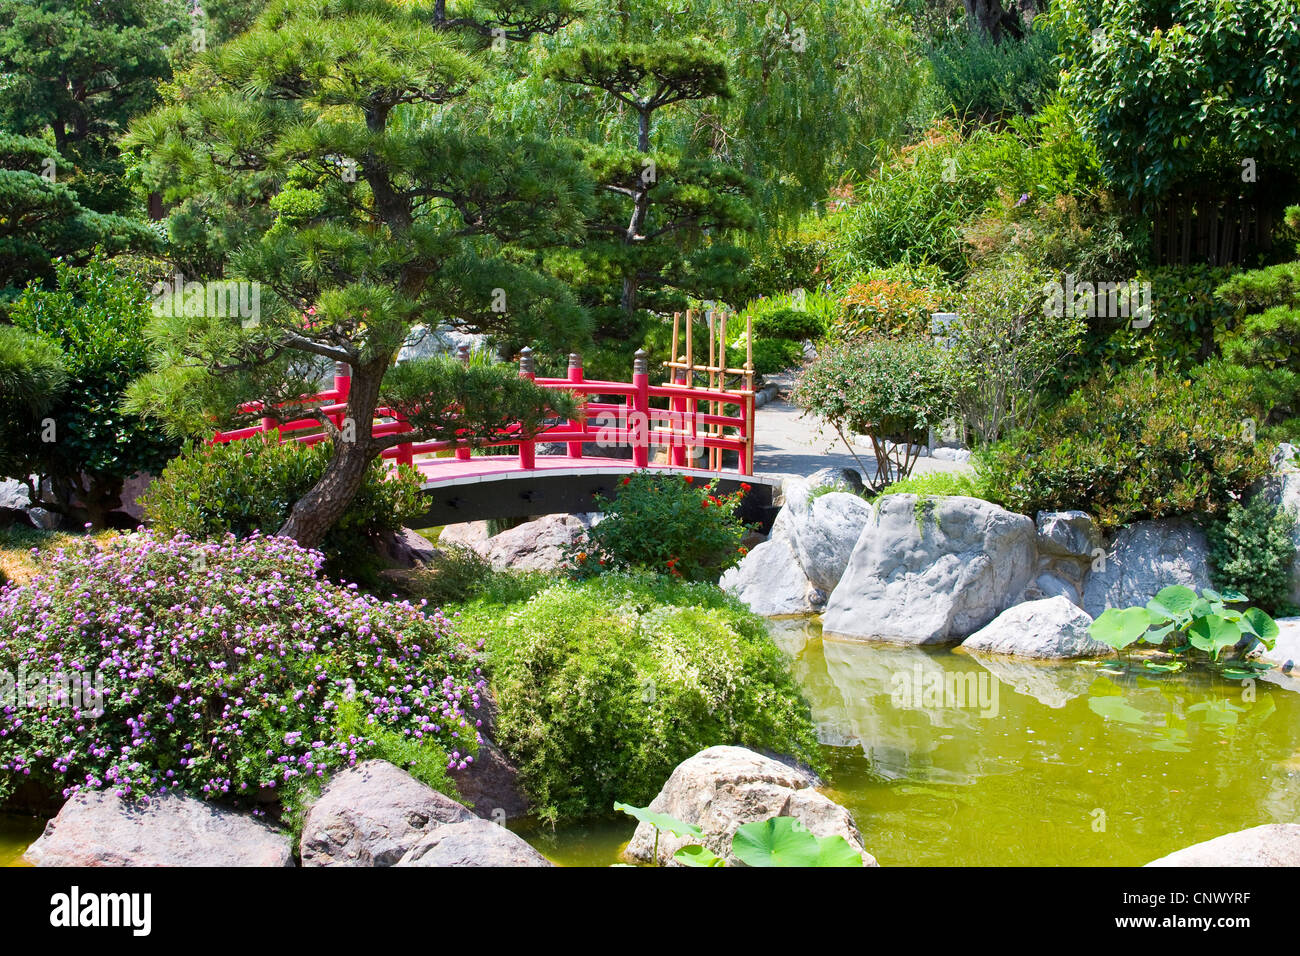  traditional  Japanese garden with wooden red bridge France 